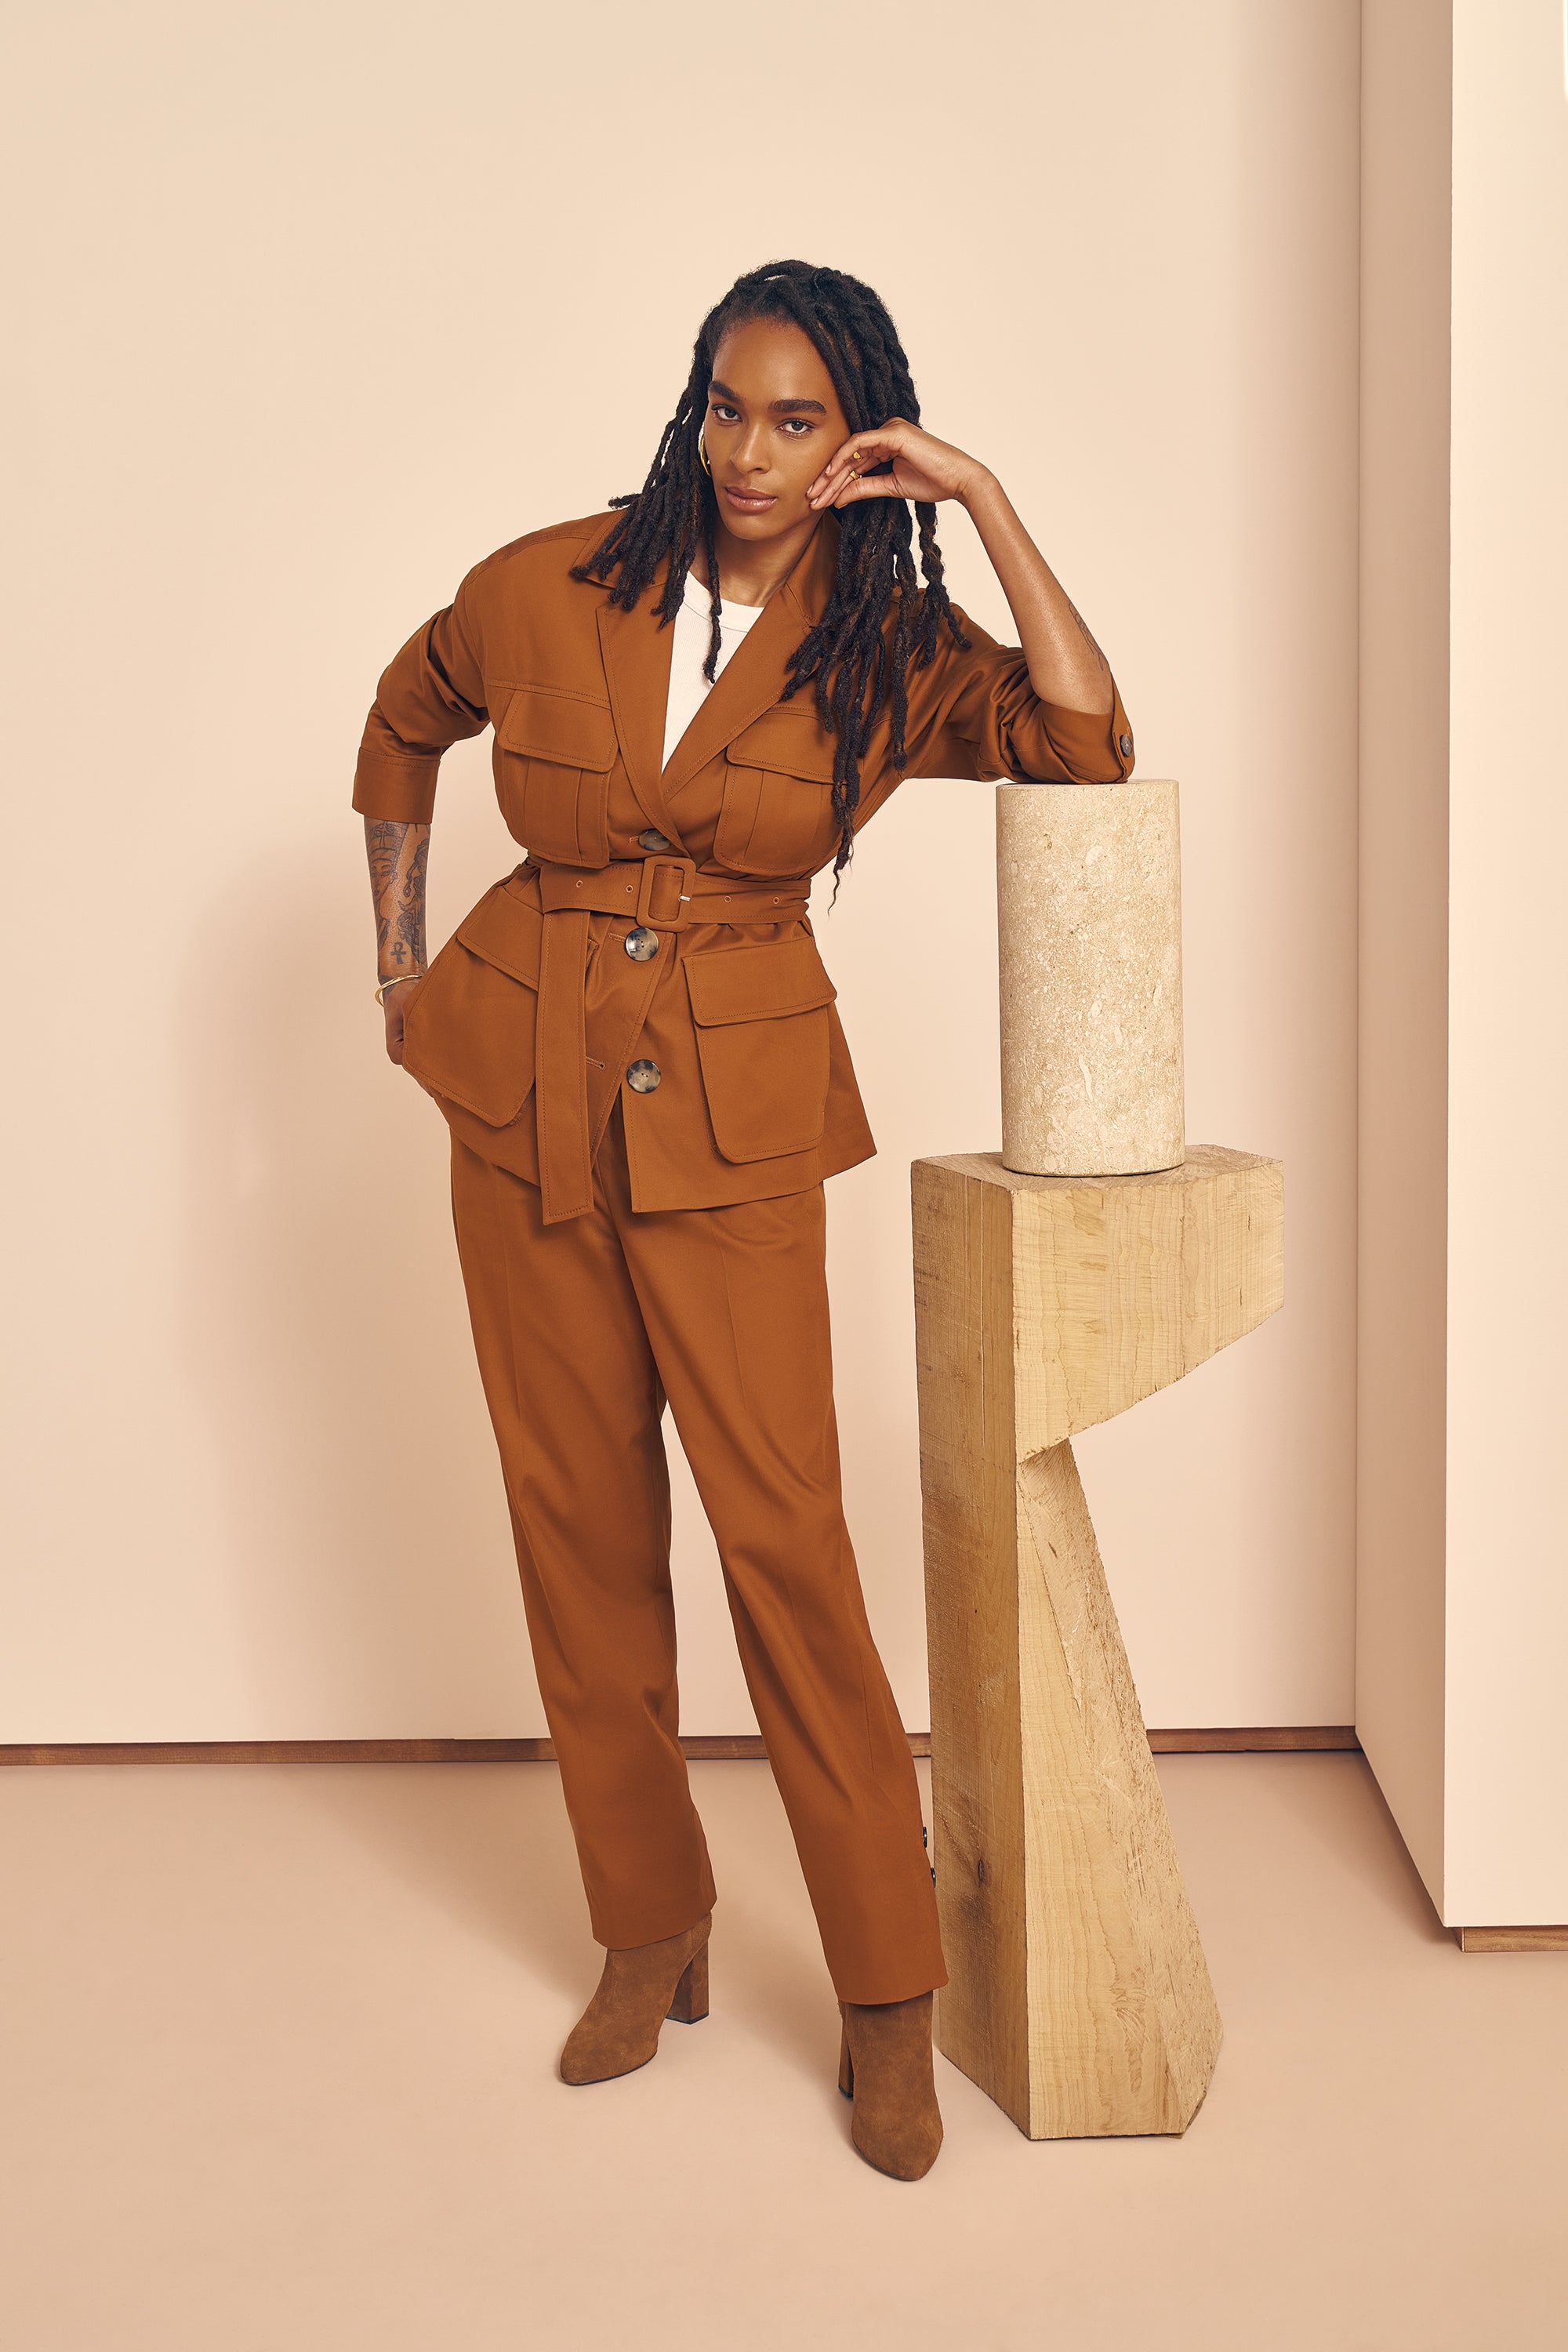 Charles Harbison’s Banana Republic Collab Is A Celebration Of Black Women